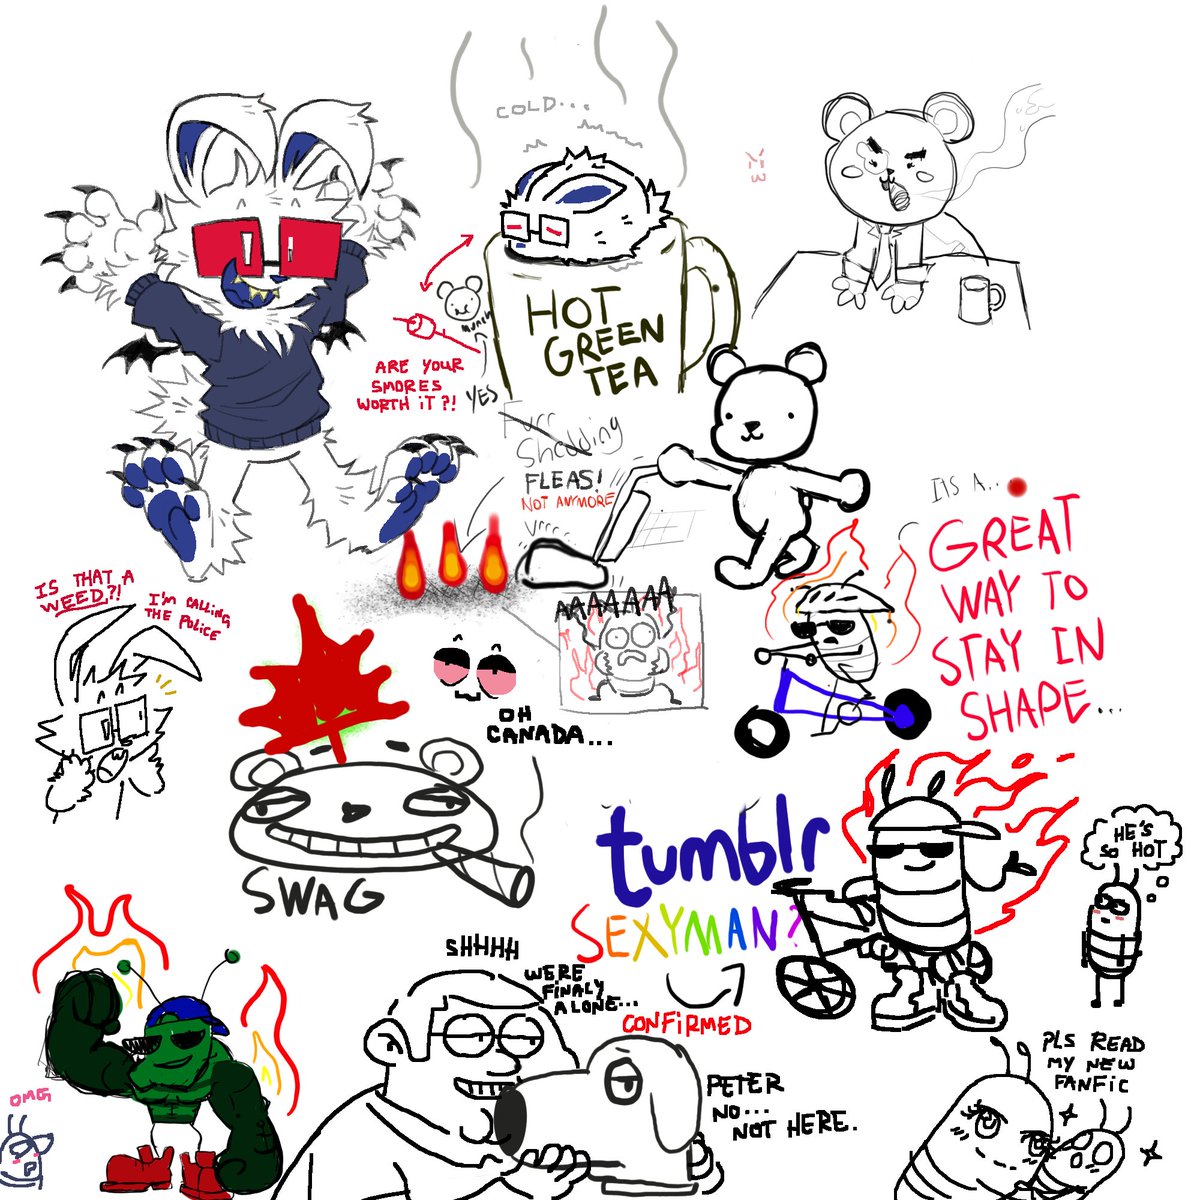 DRAWPILE IS SO FUN!! This chaos was made with my friend @a_TastyBeverage 🐻 